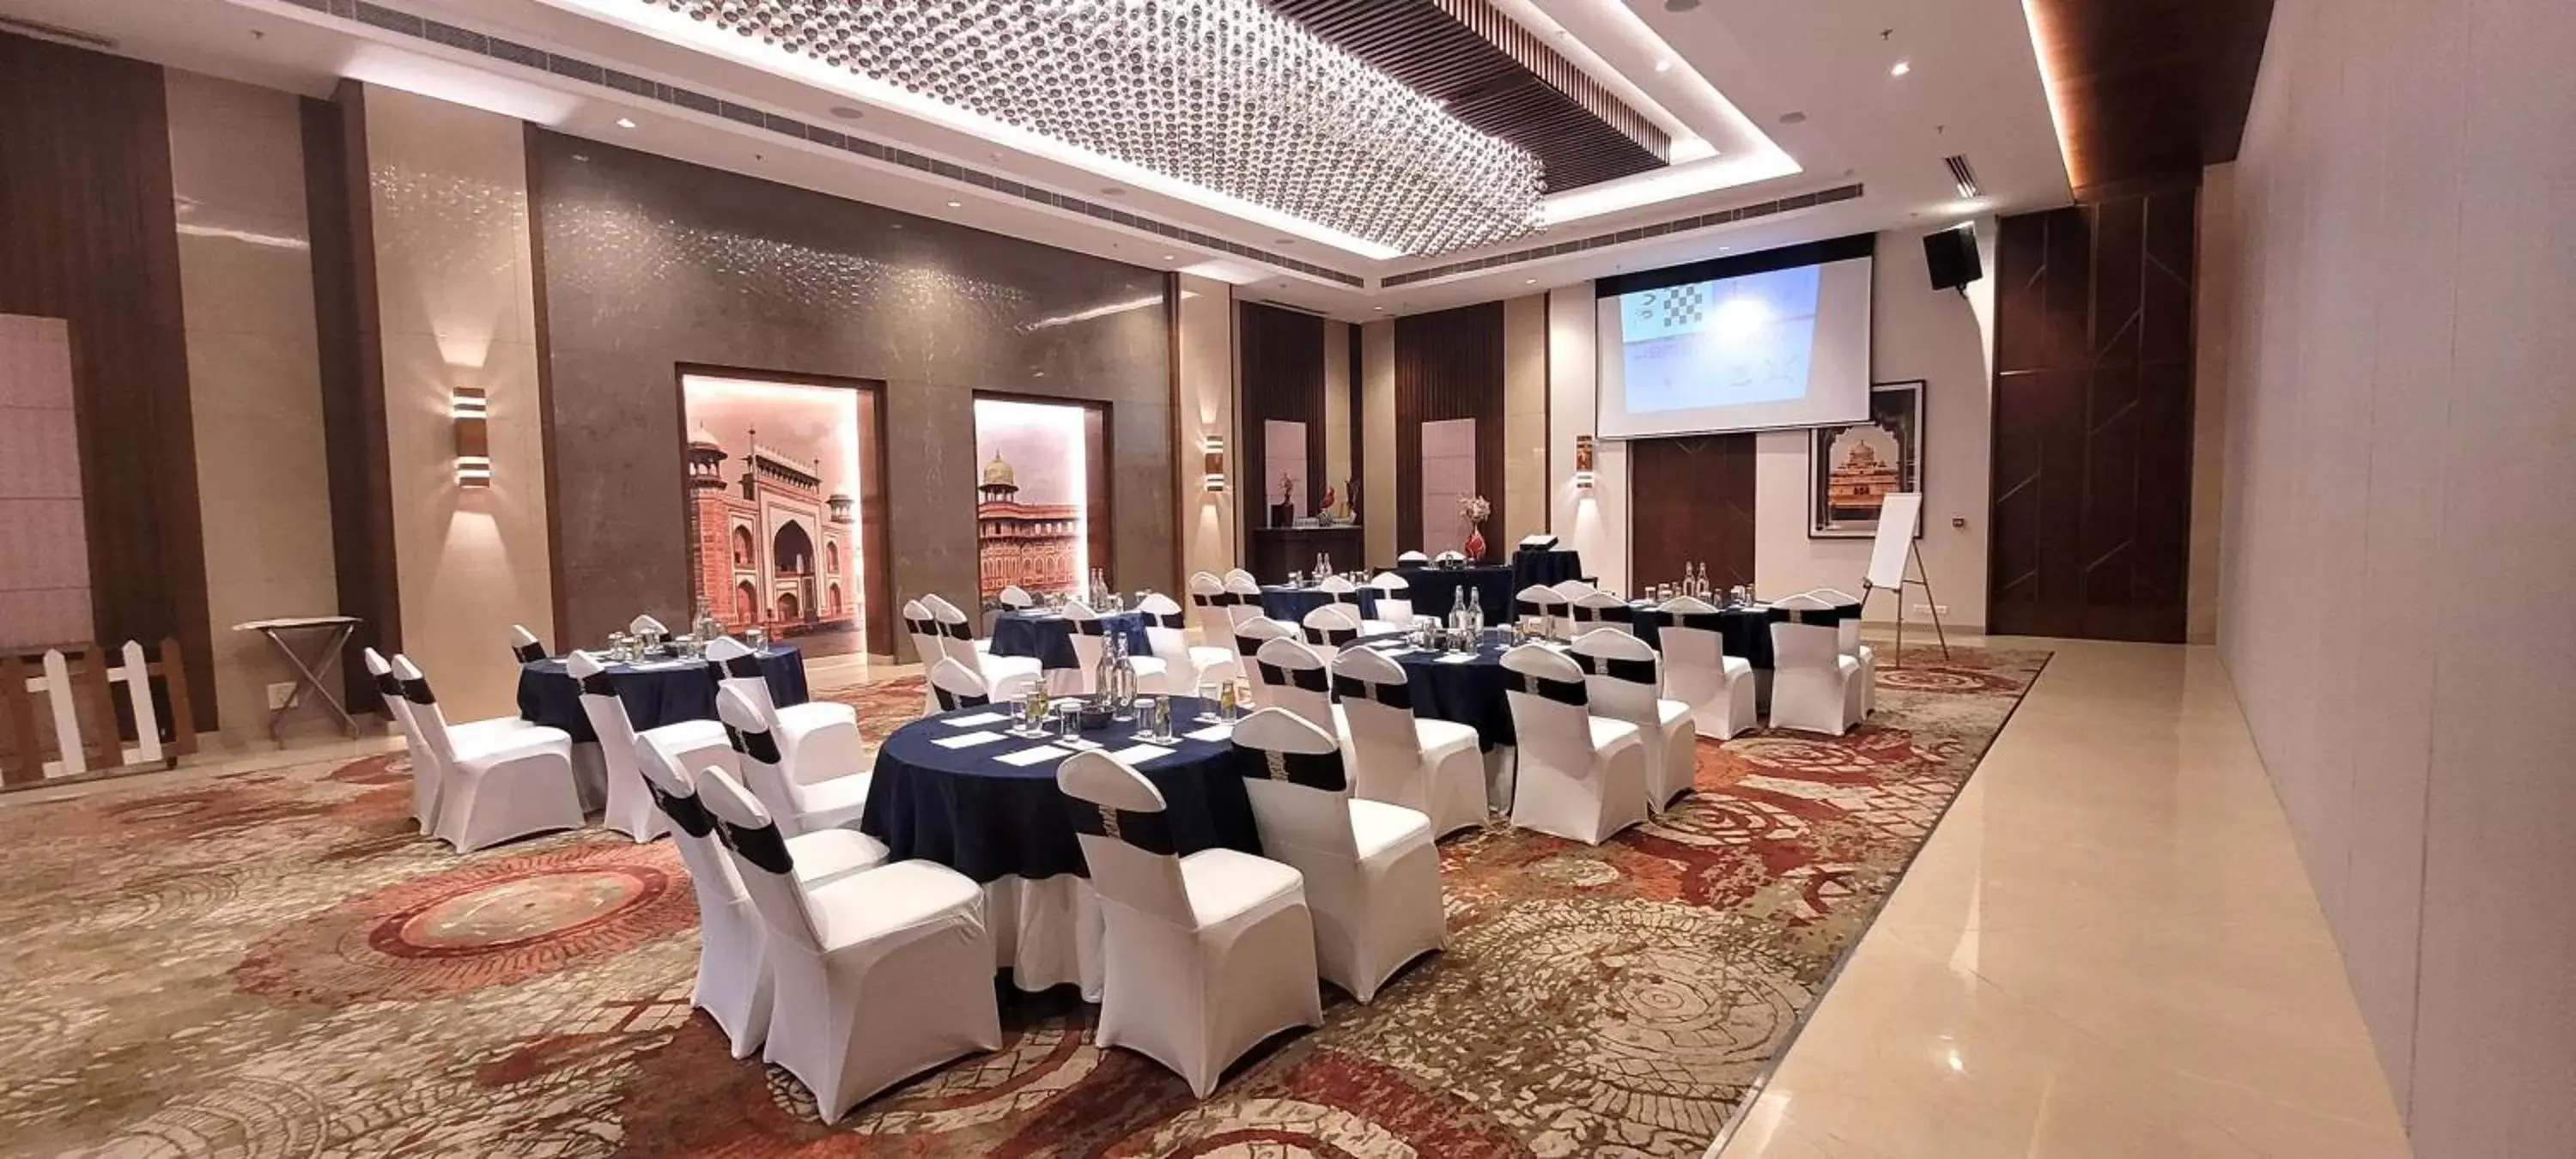 Meeting/conference room, Banquet Facilities in Radisson Blu Hotel, Greater Noida